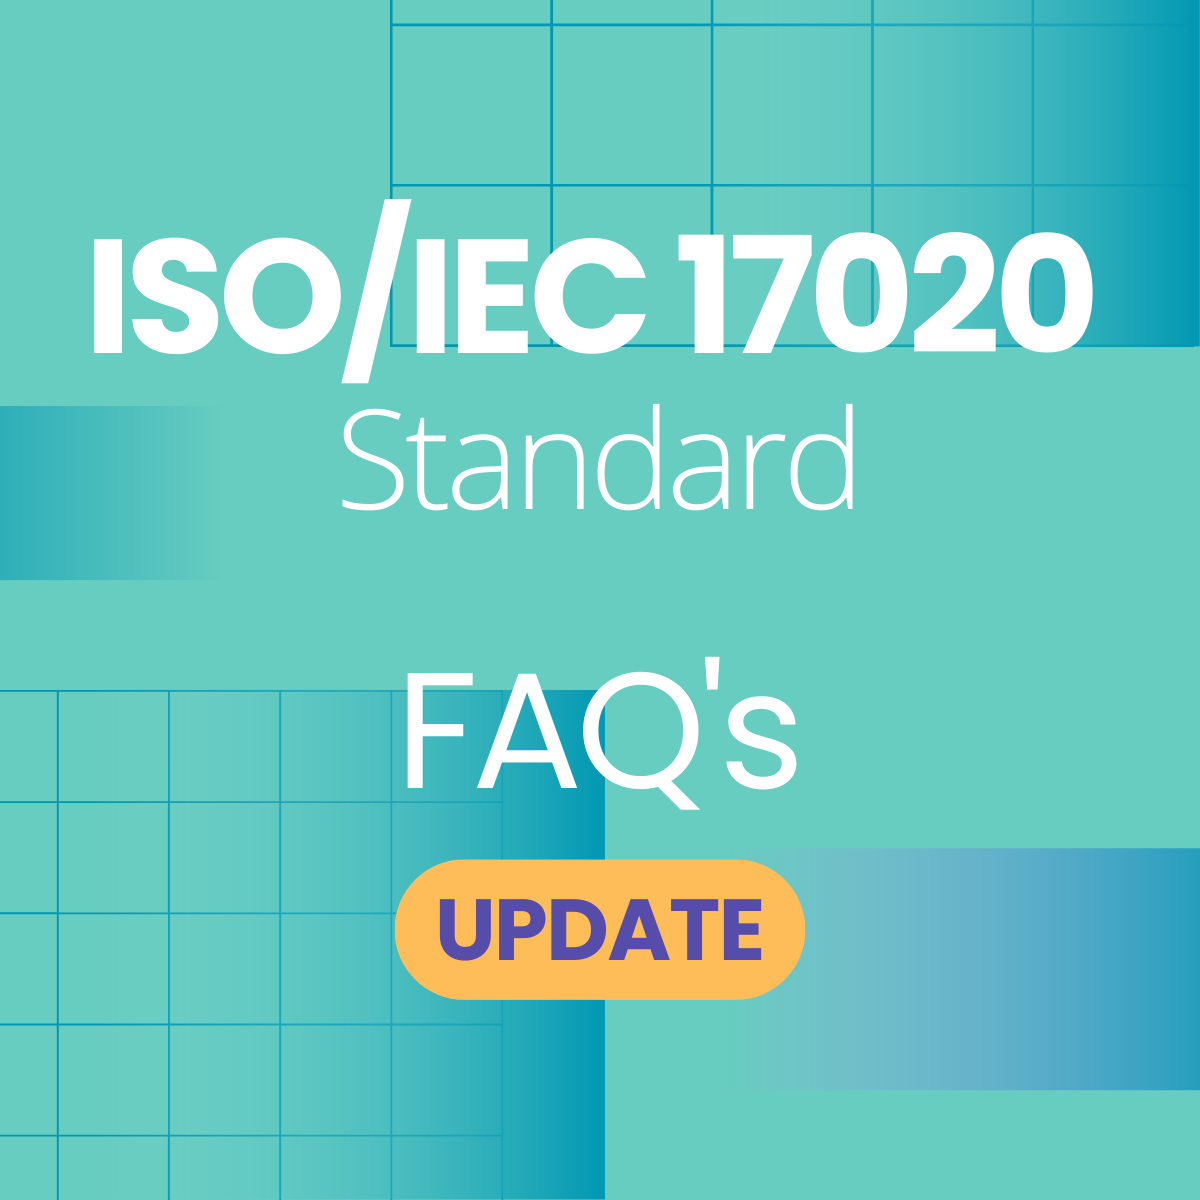 FREQUENTLY ASKED QUESTIONS AND ANSWERS ABOUT ISO / IEC 17020